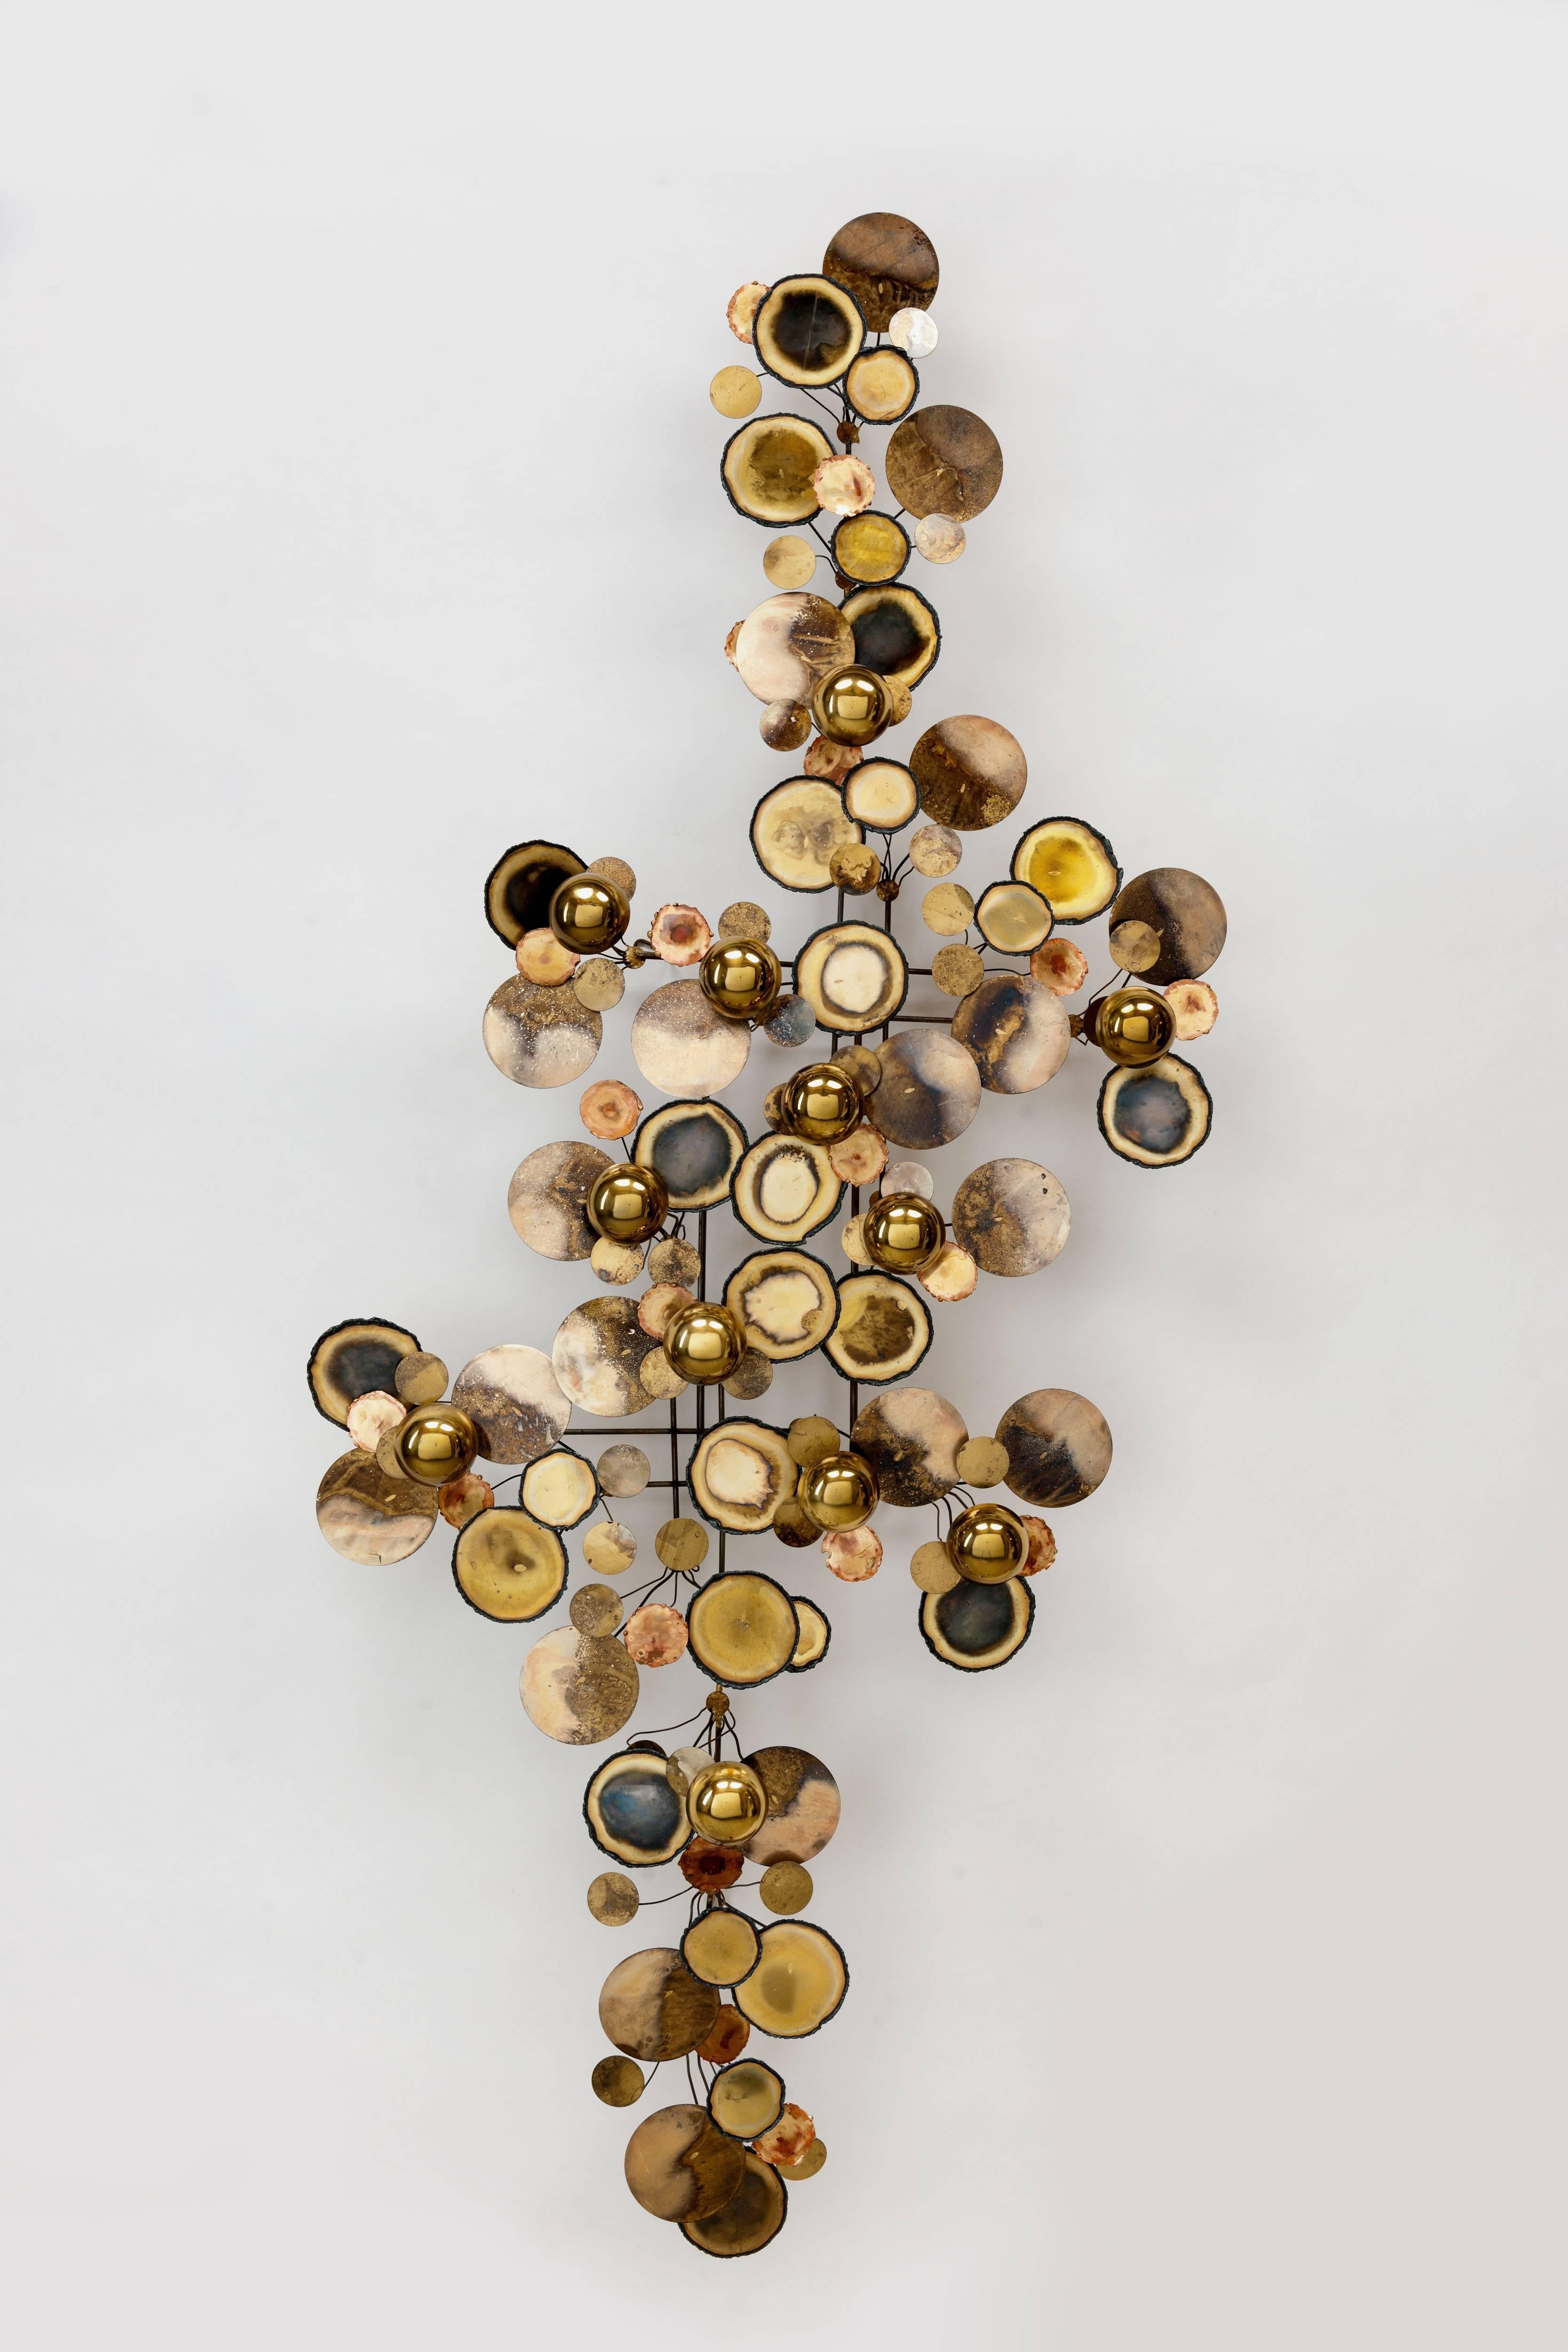 Iconic 'Raindrops' wall sculpture by C. Jere / Artisan House, in brass execution.
Abstract metal wall sculpture of torched edge disc's and half spheres made originally between 1965-1979. 
This object is magnificent condition, is fully signed